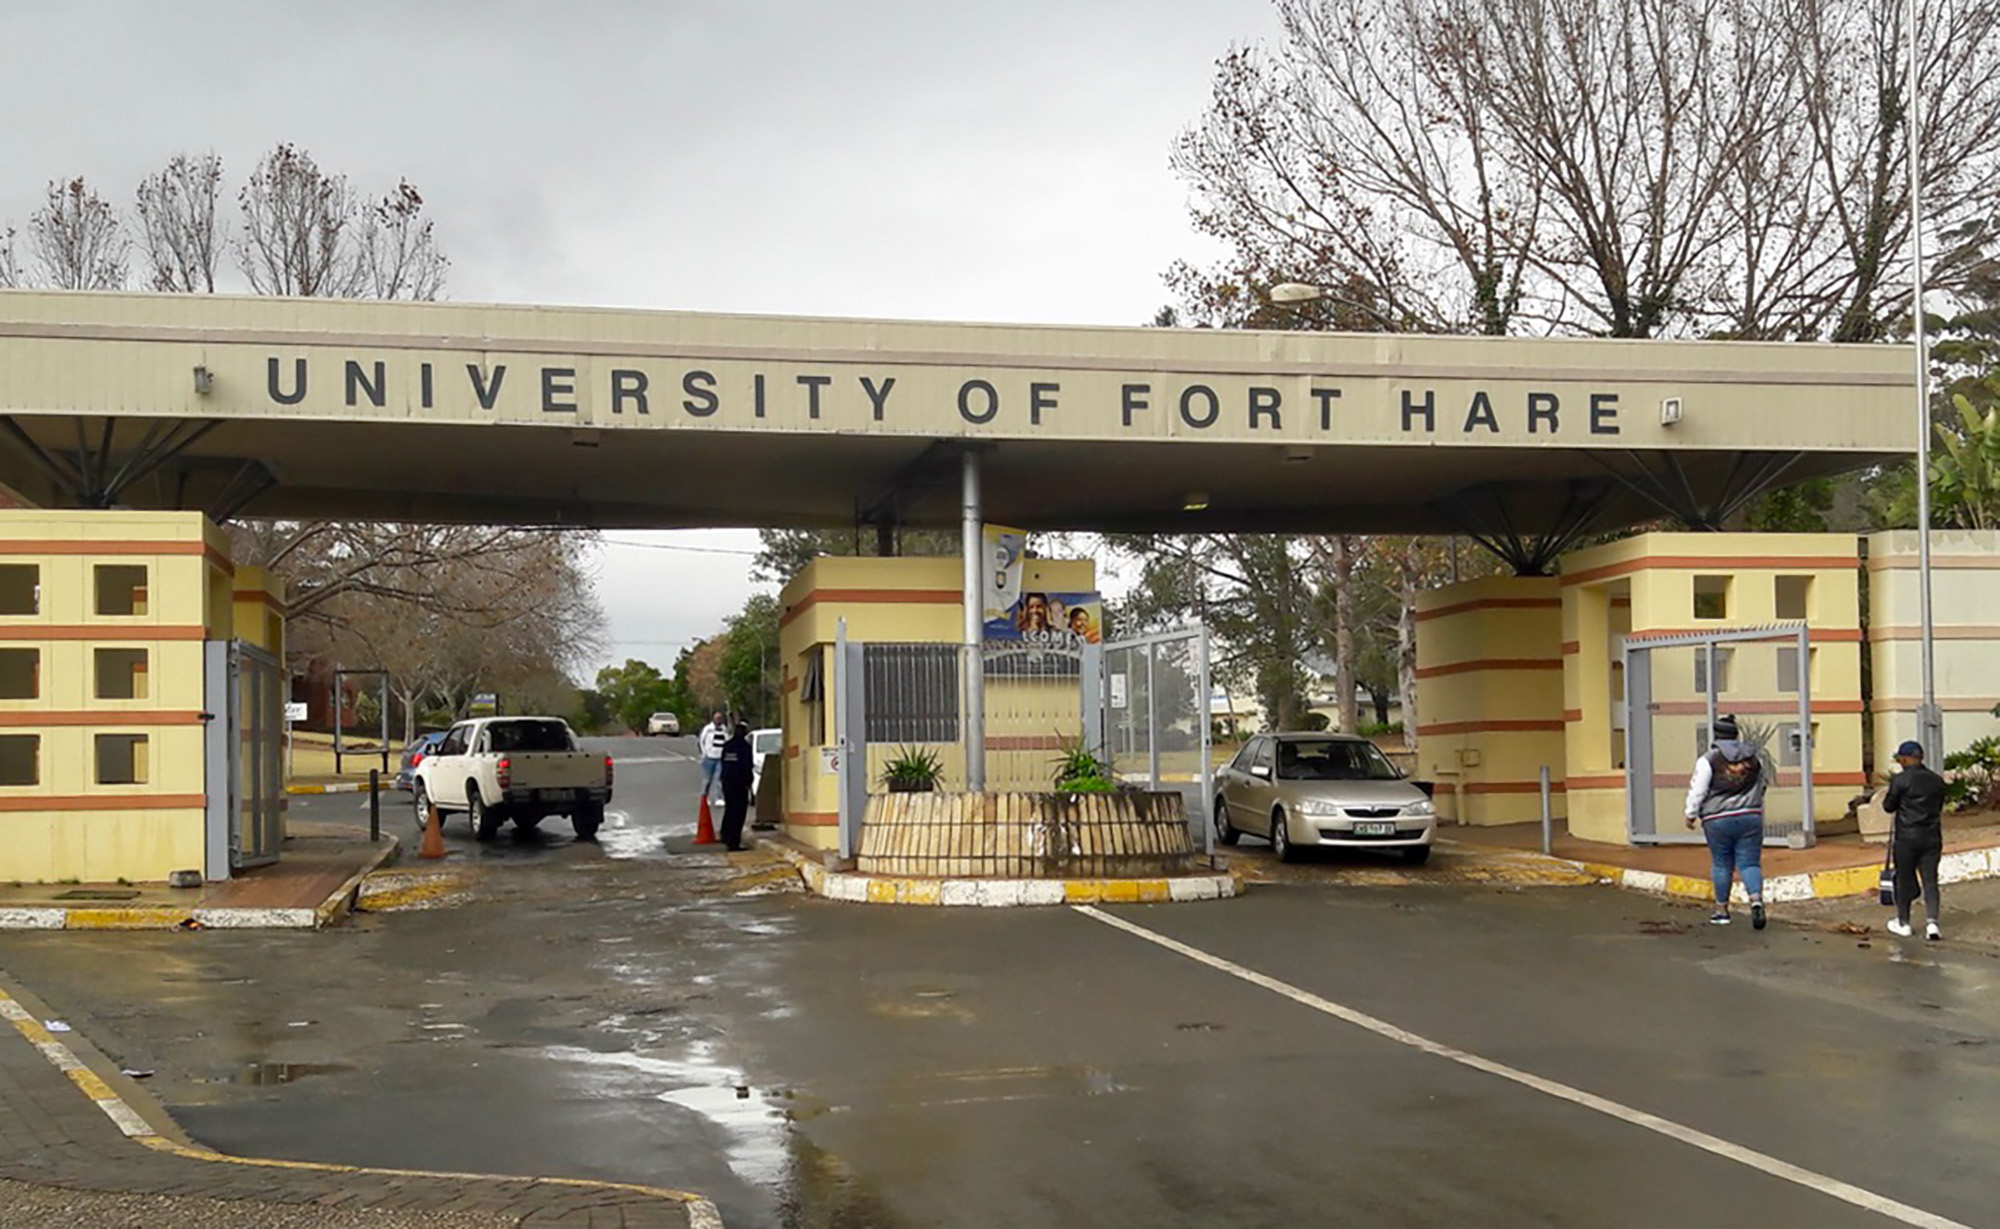 fort hare assassinations